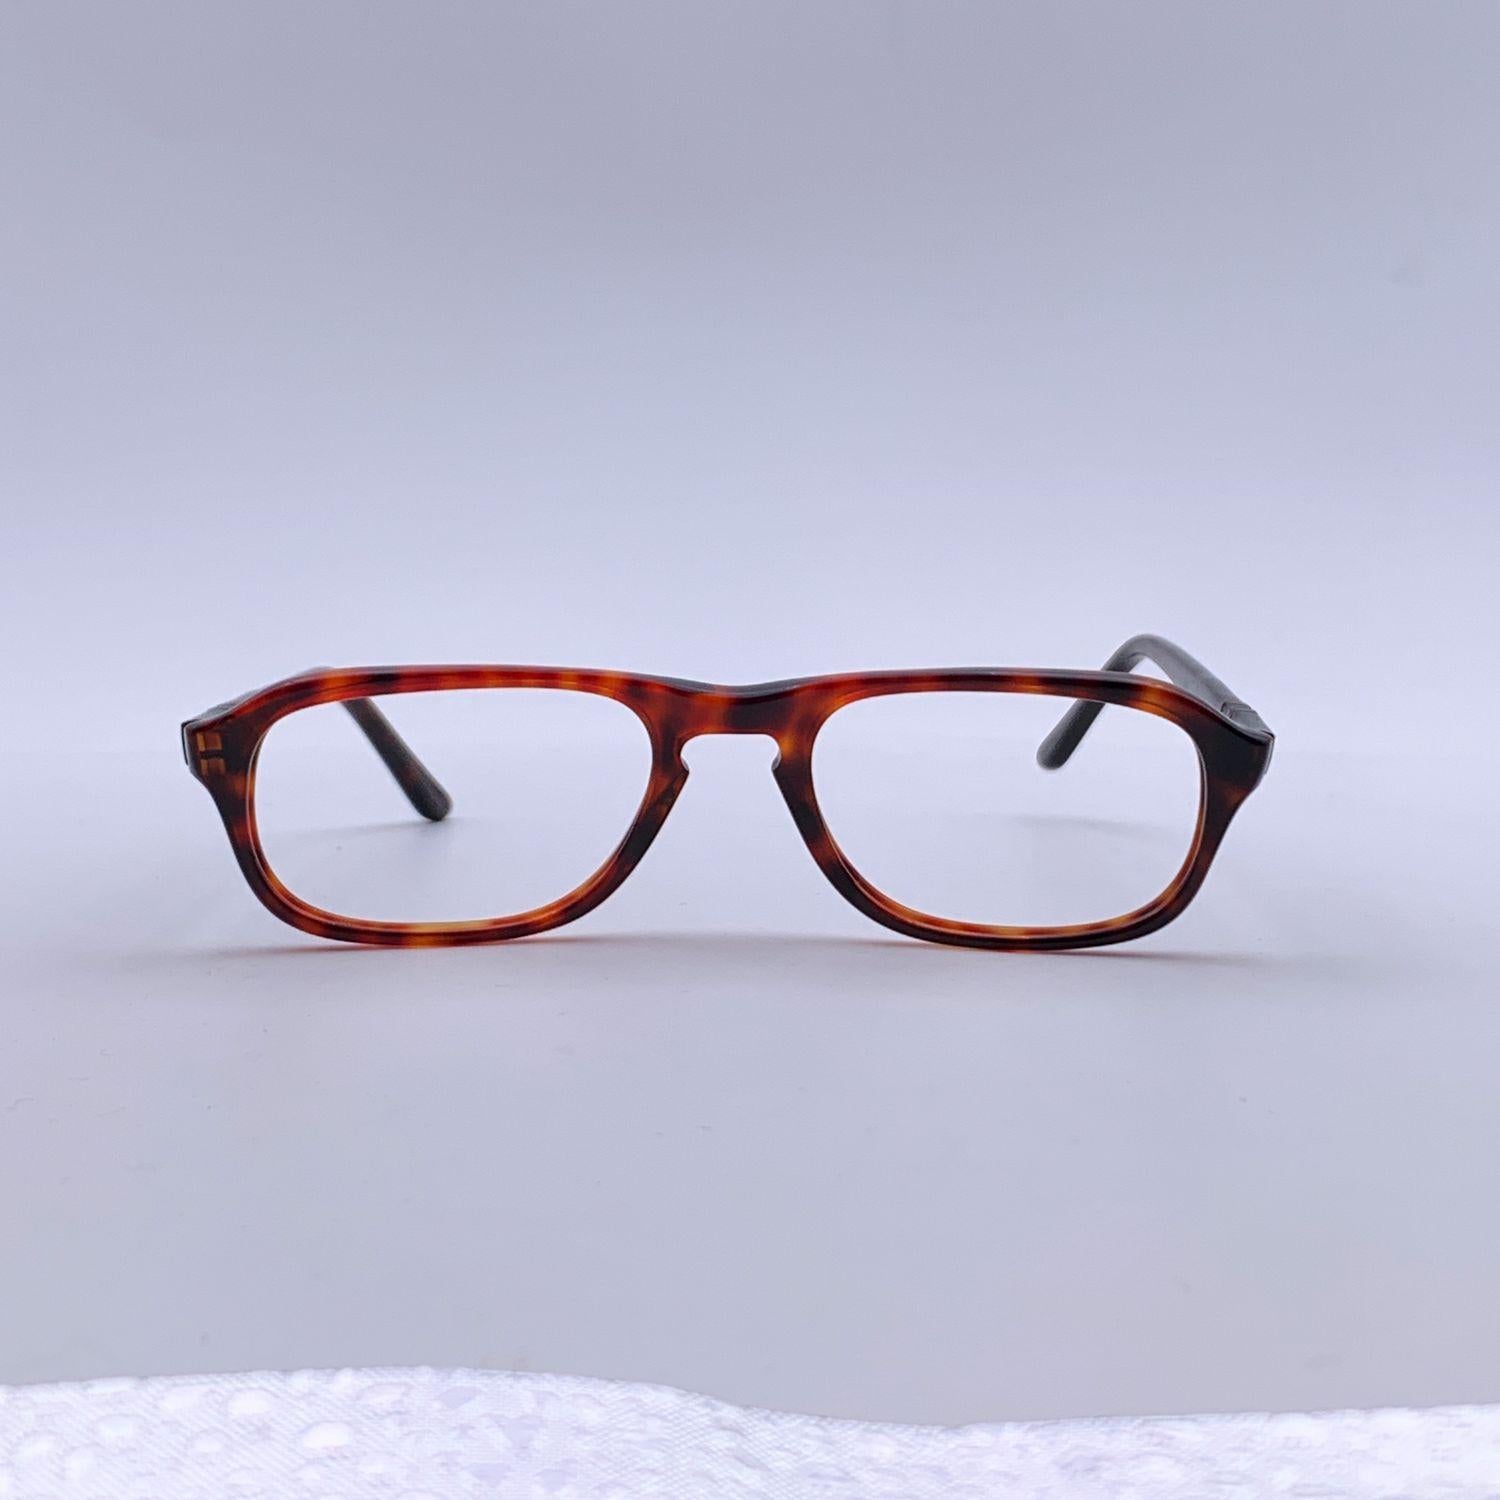 PERSOL Meflecto Ratti Vintage Eyeglasses- Model: Jolly 1. Dark Brown acetate frame. No lenses. Flexible temples. Made in Italy. Style & Refs: Jolly 1 - 50-70

Details

MATERIAL: Acetate

COLOR: Brown

MODEL: Jolly 1

GENDER: Women

COUNTRY OF